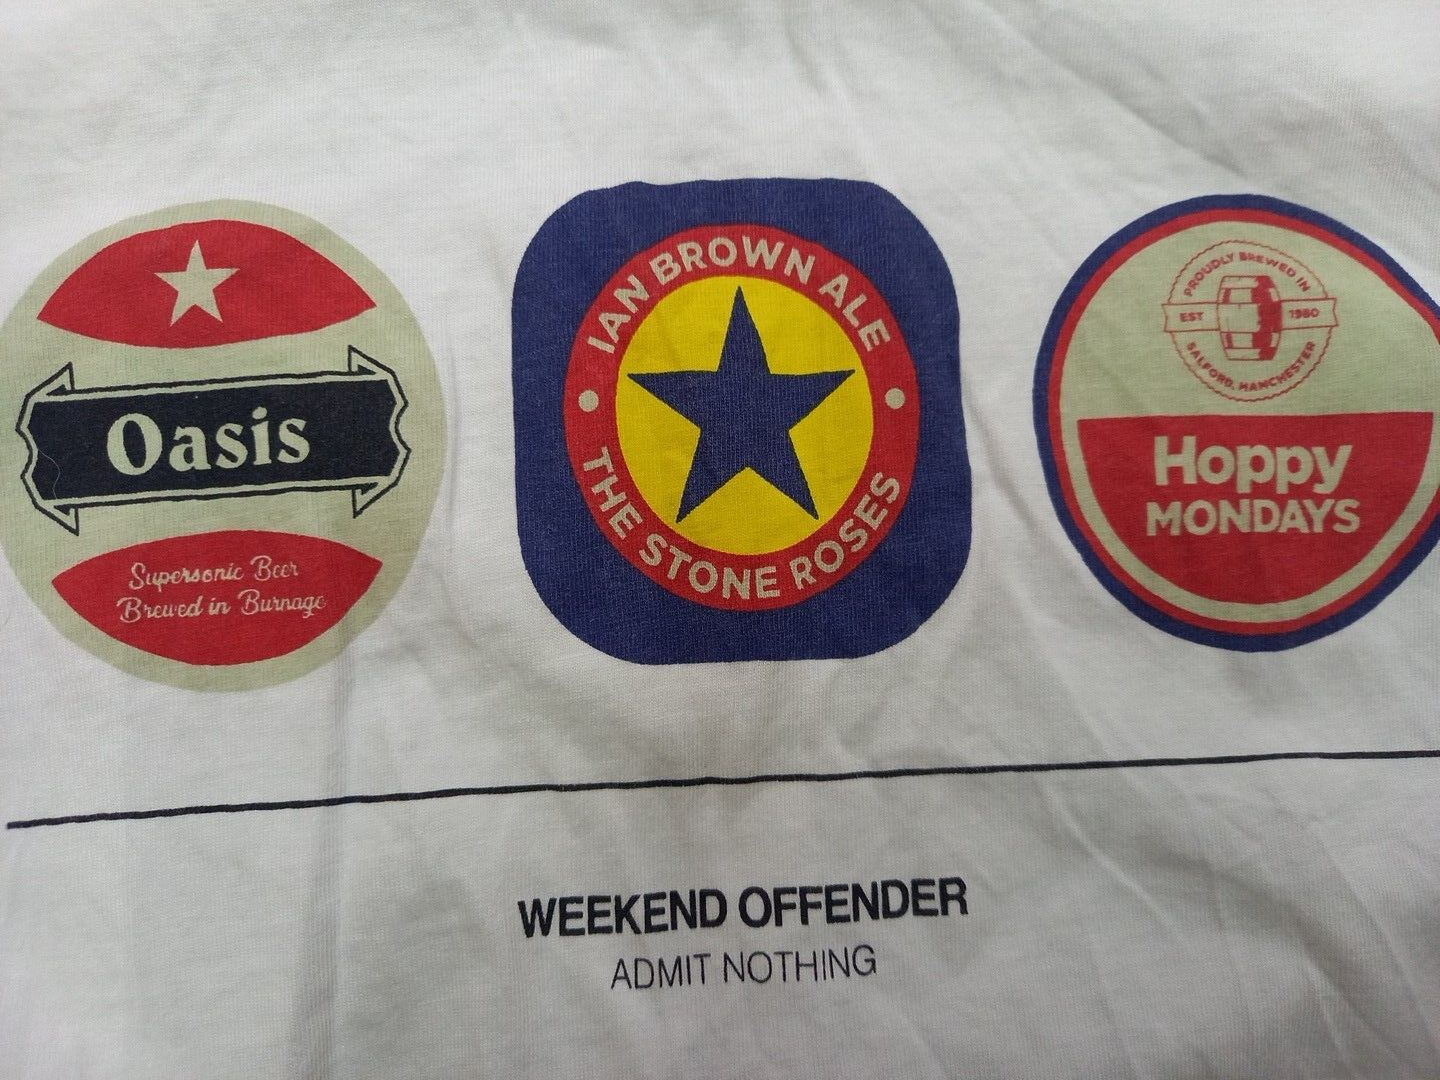 WEEKEND OFFENDER OASIS IAN BROWN HAPPY MONDAYS’ T-SHIRT. .THE SPECIALS MOD TOP